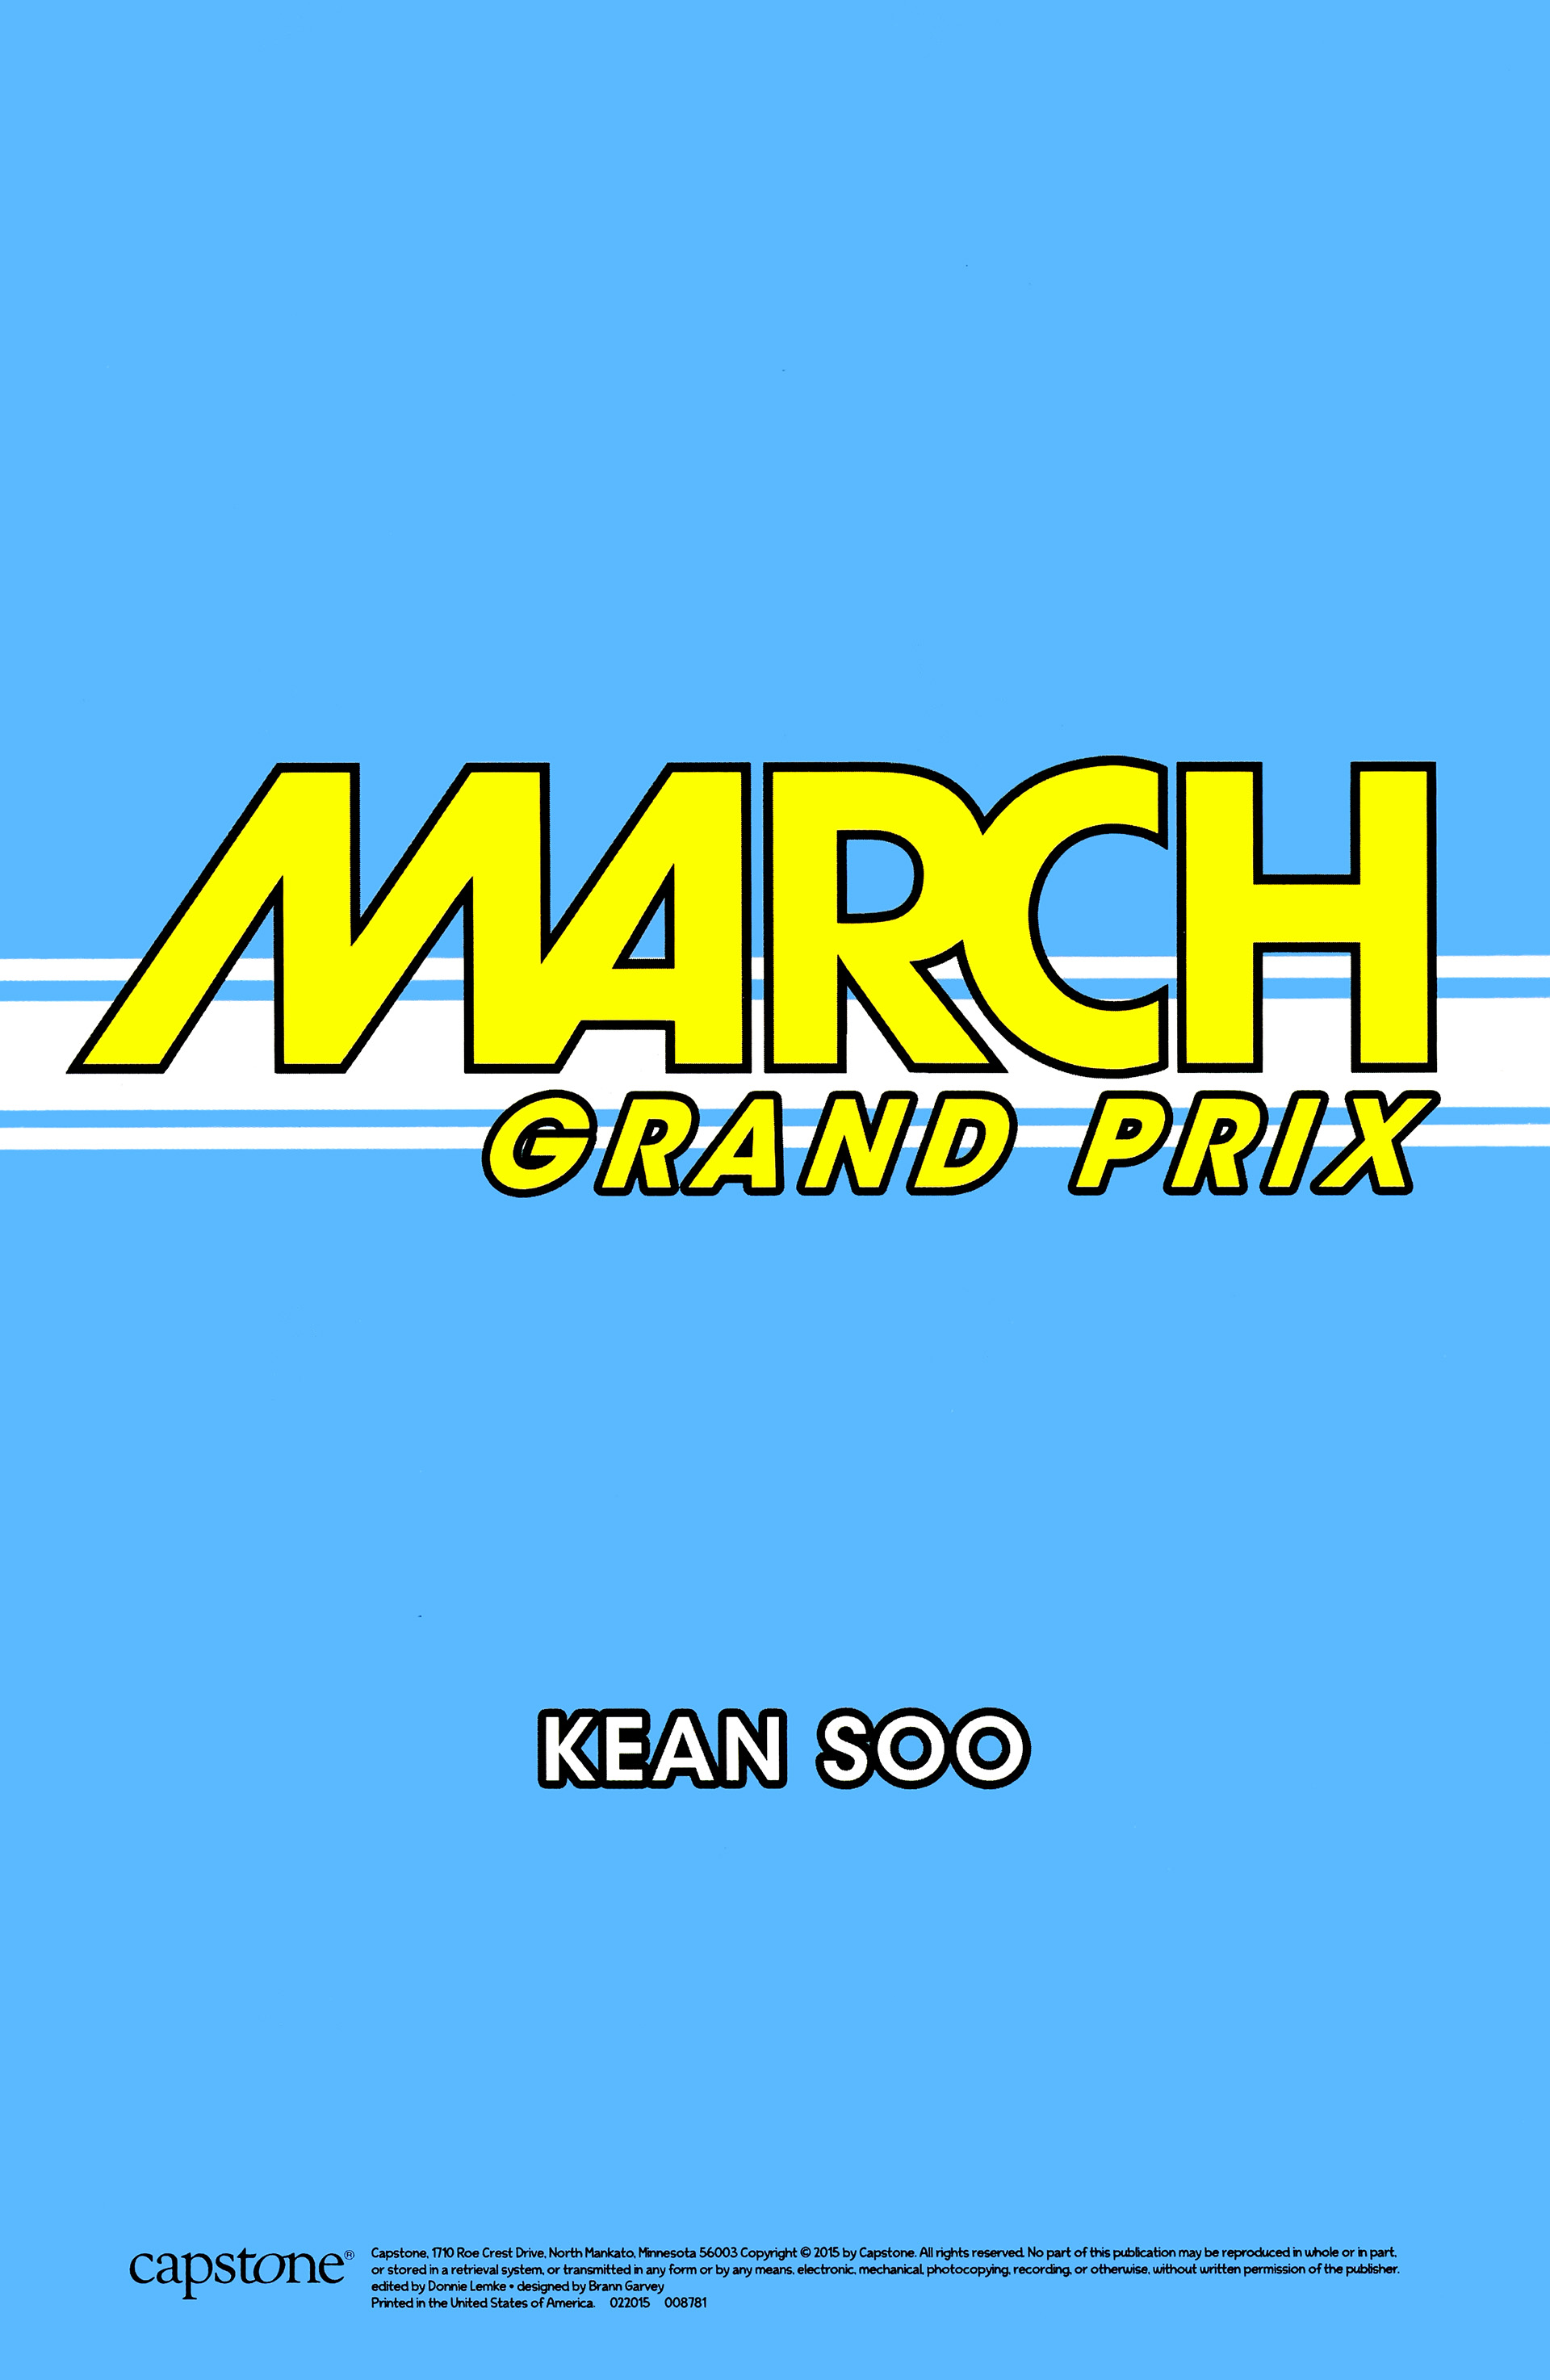 Read online Free Comic Book Day 2015 comic -  Issue # March Grand Prix - 3